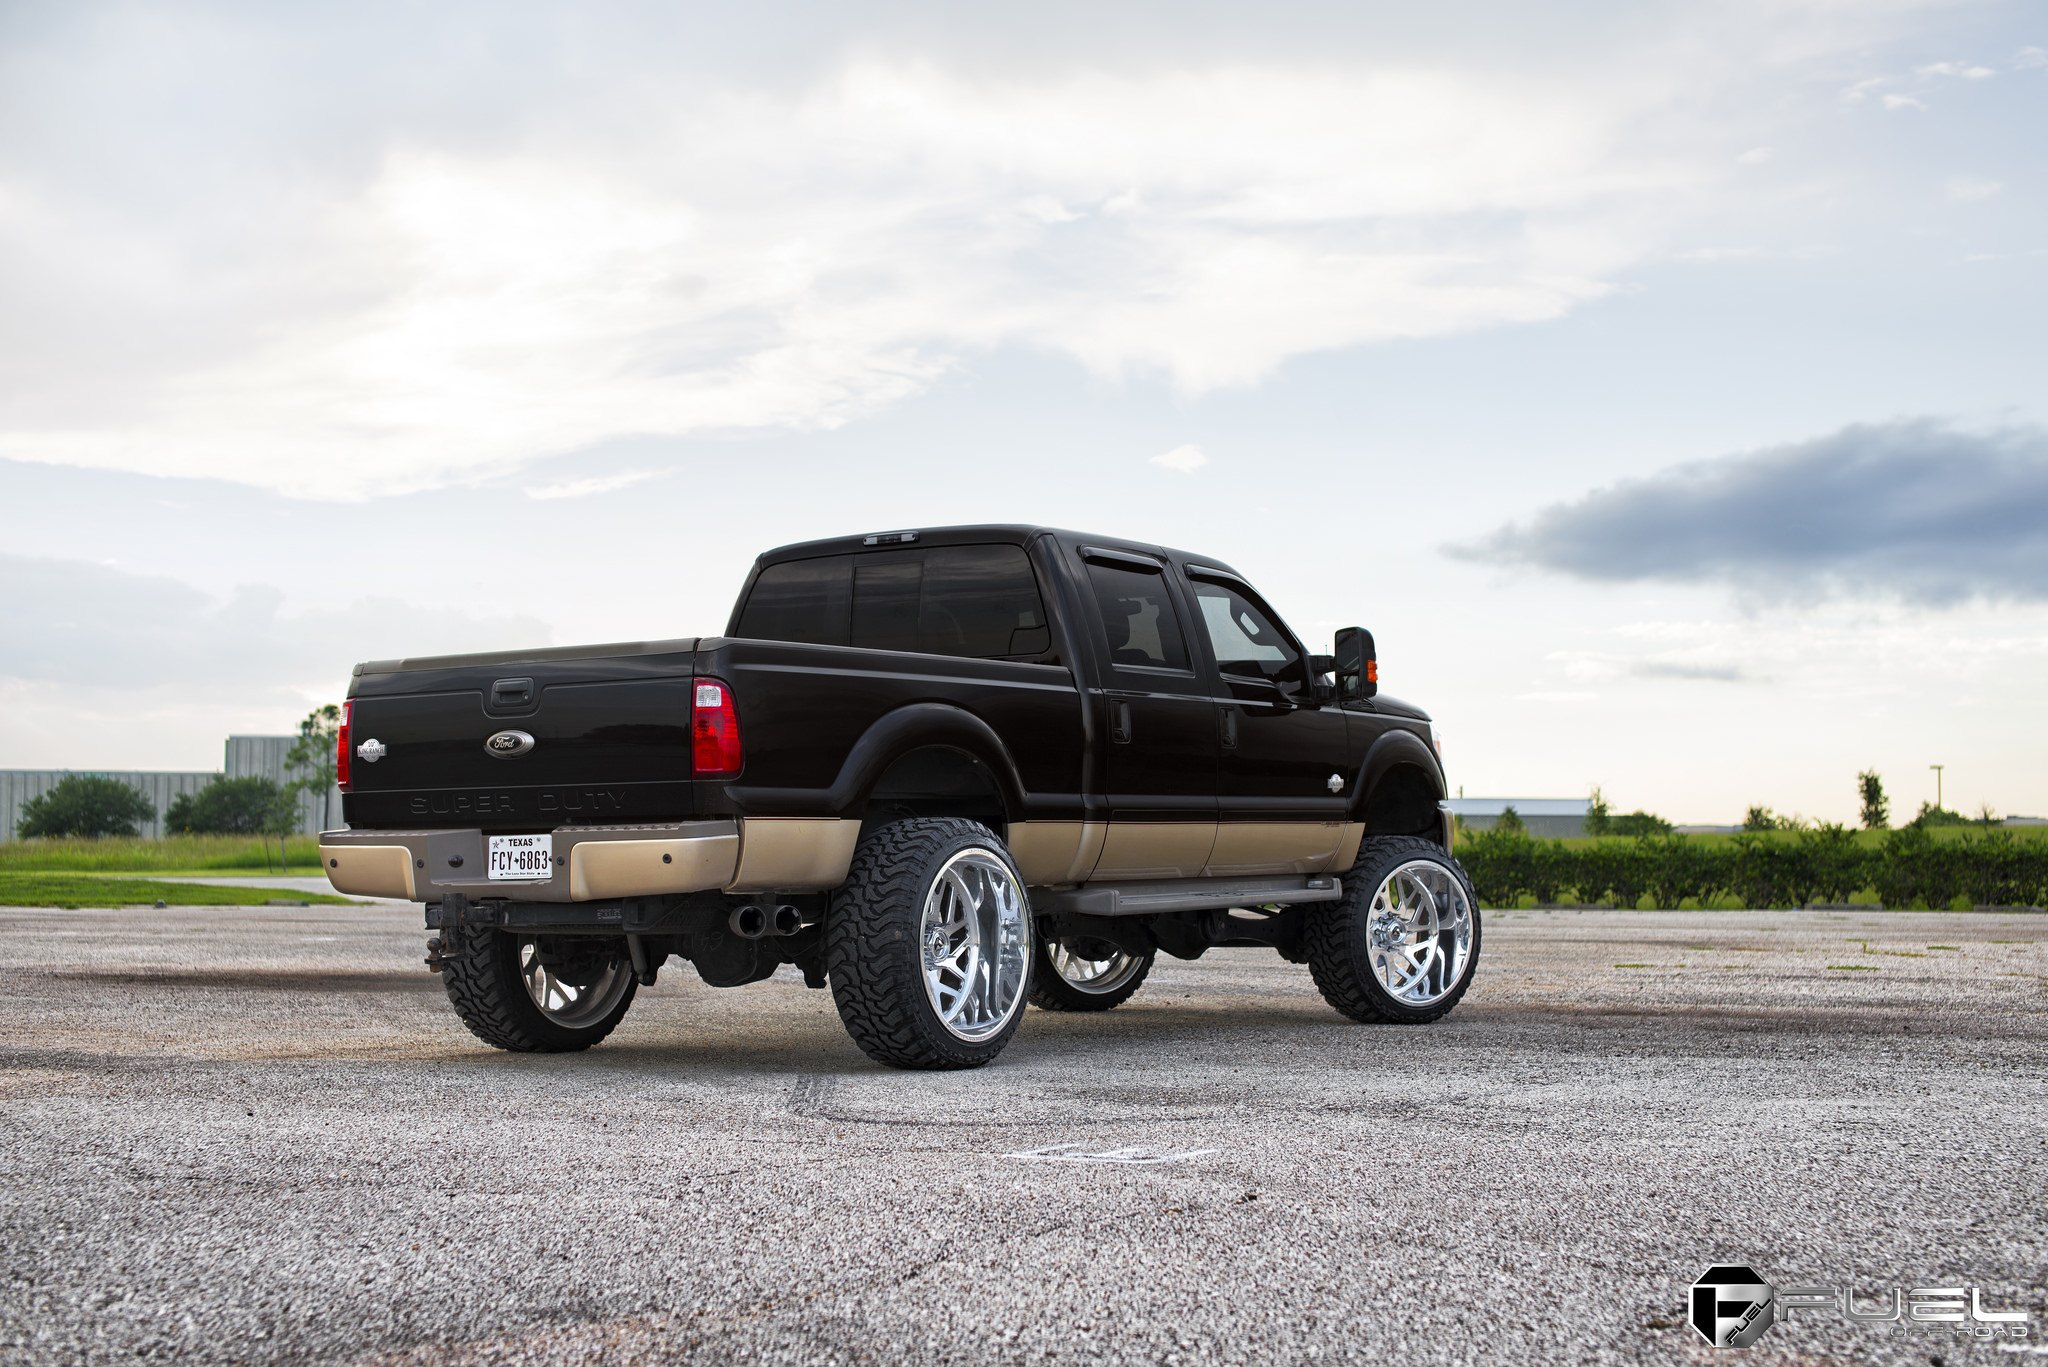 Aftermarket Rear Bumper on Black Ford F-250 - Photo by Fuel Offroad